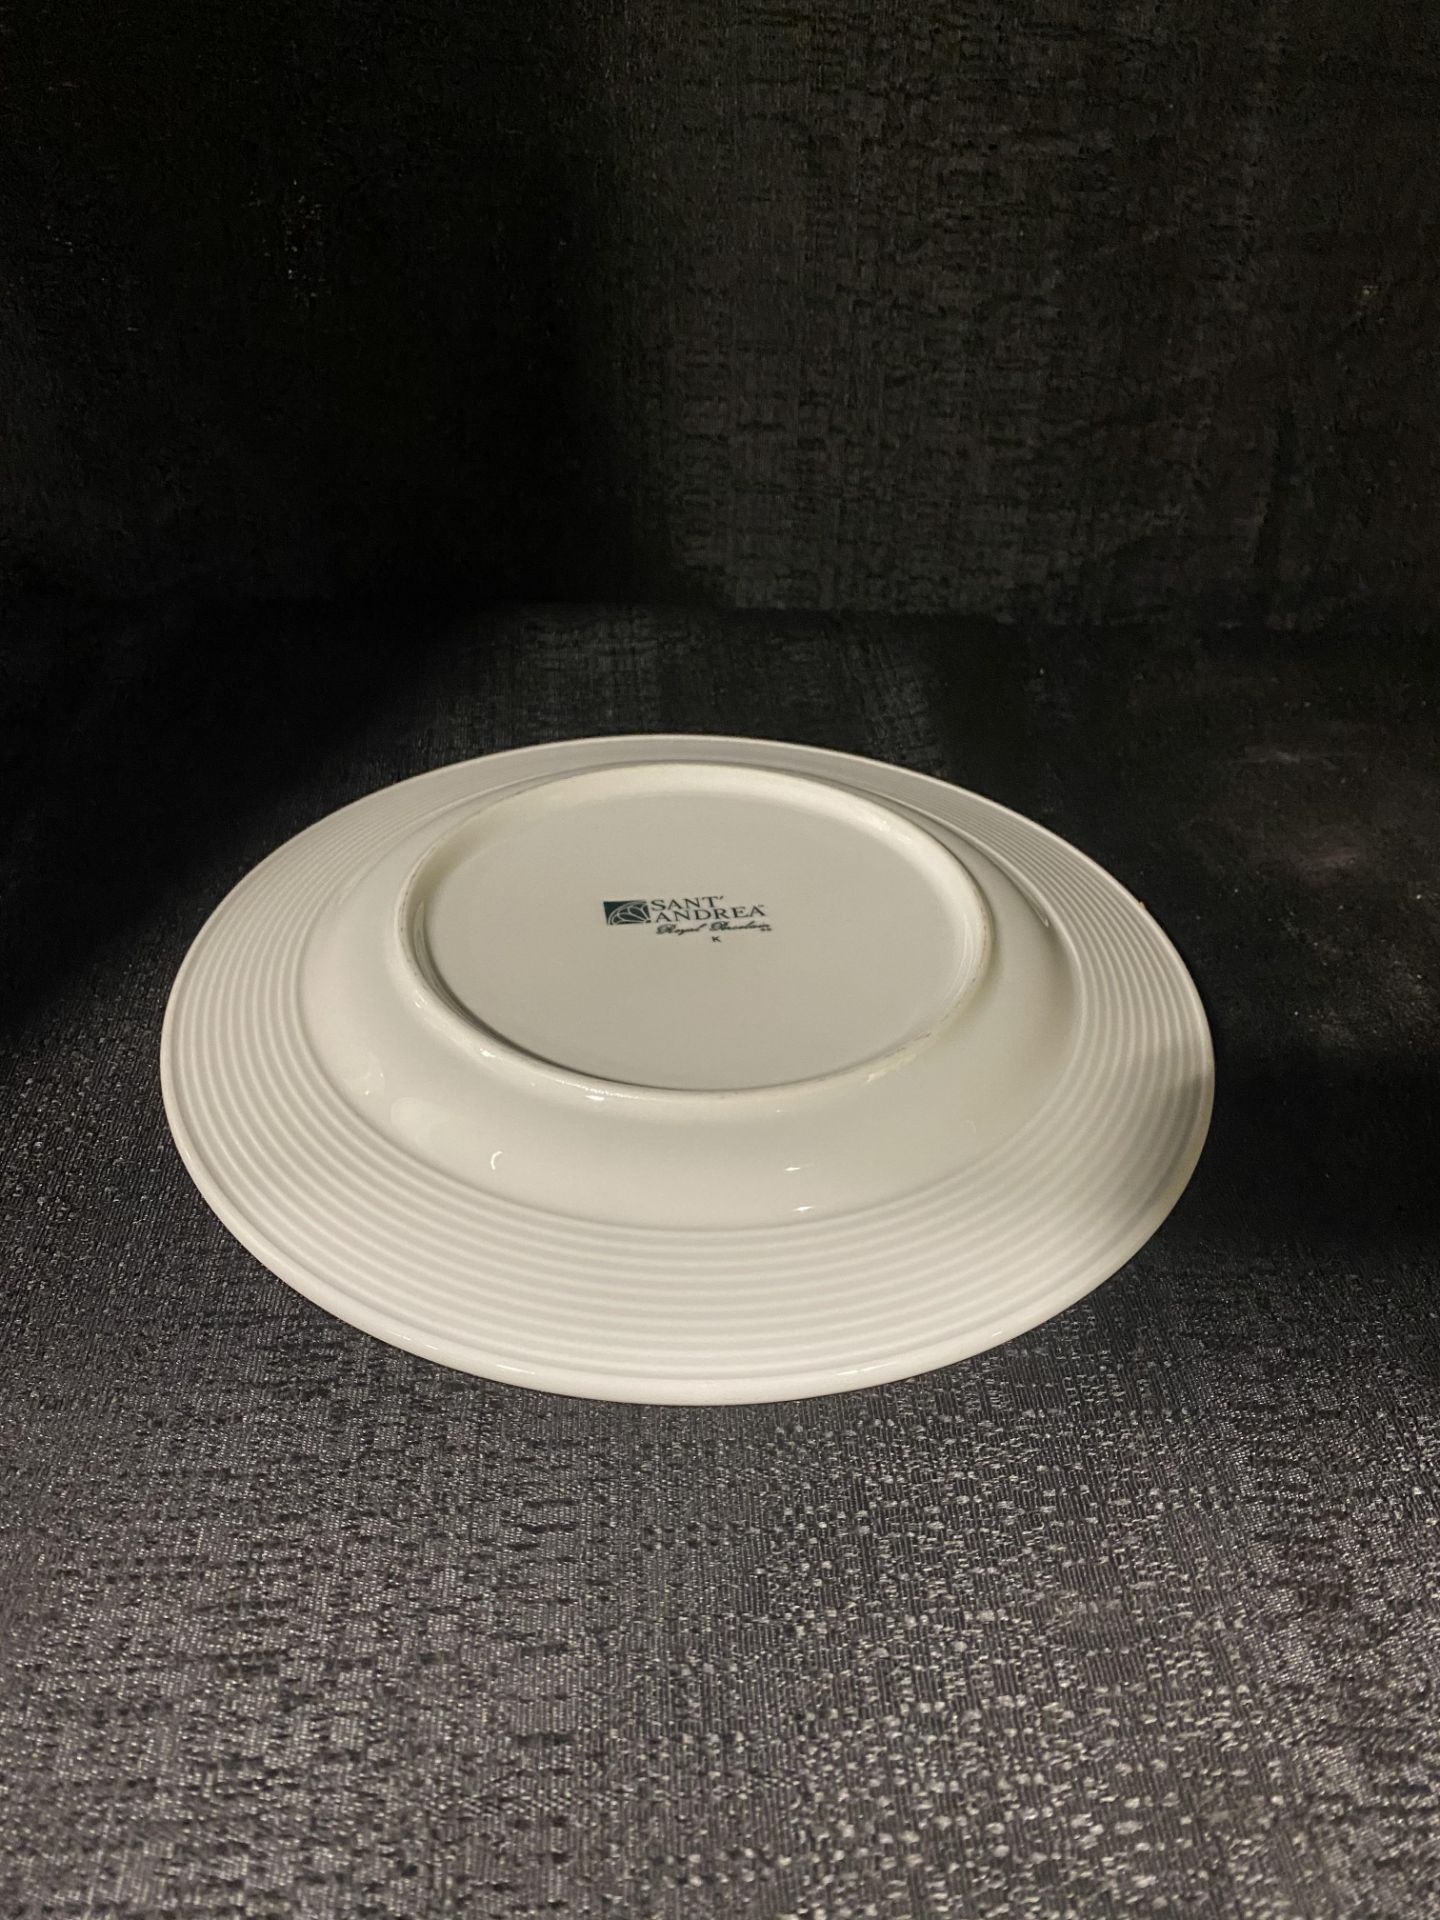 (50) 9.5" Salad/Dessert Plates White China Sant Andrea (BRING PACKING MATERIAL) - Image 2 of 2